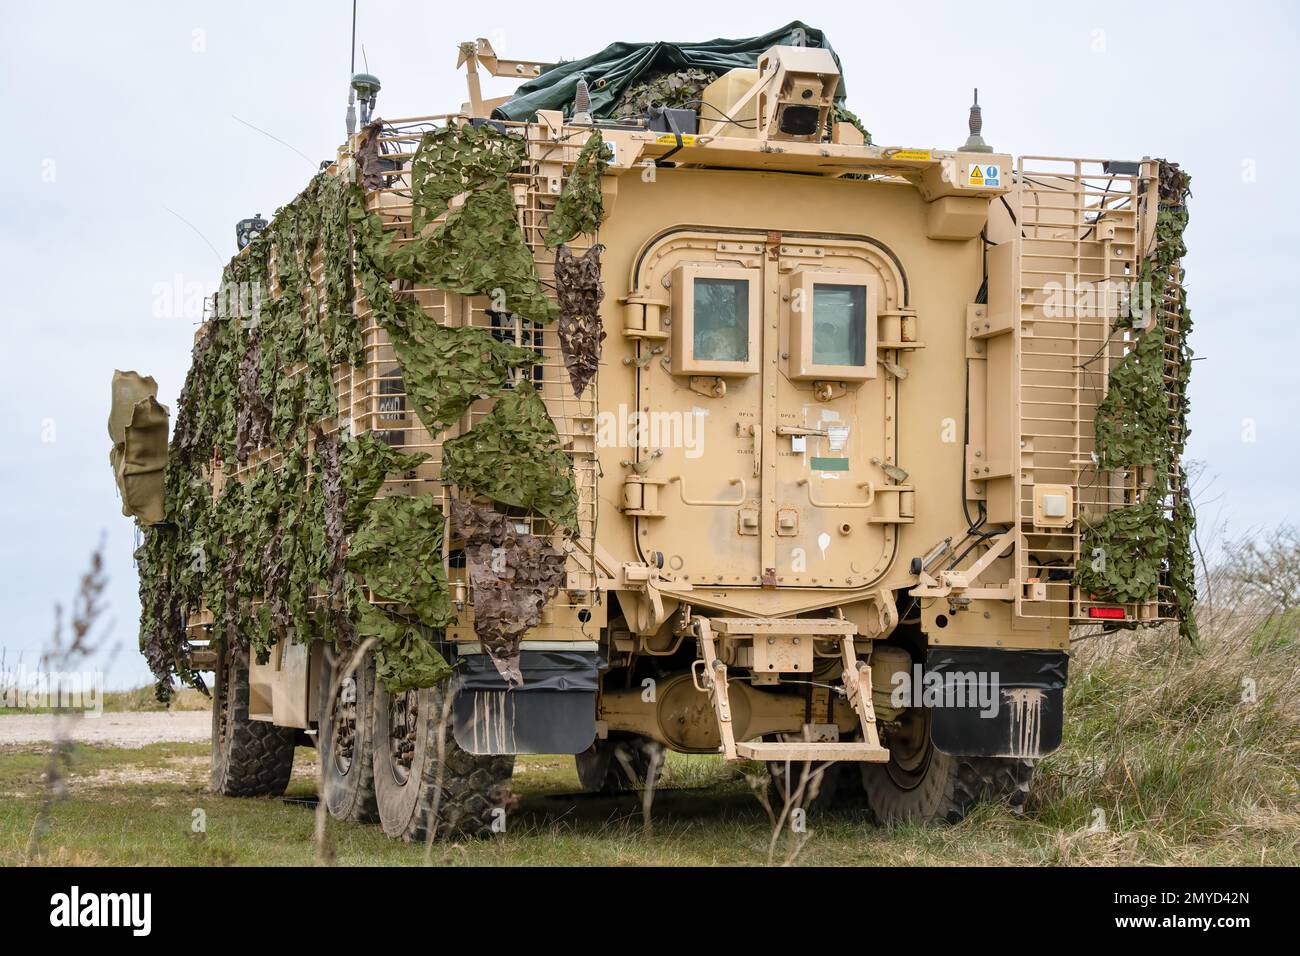 close-up of a British army Mastiff protected patrol vehicle under green camouflage netting Stock Photo